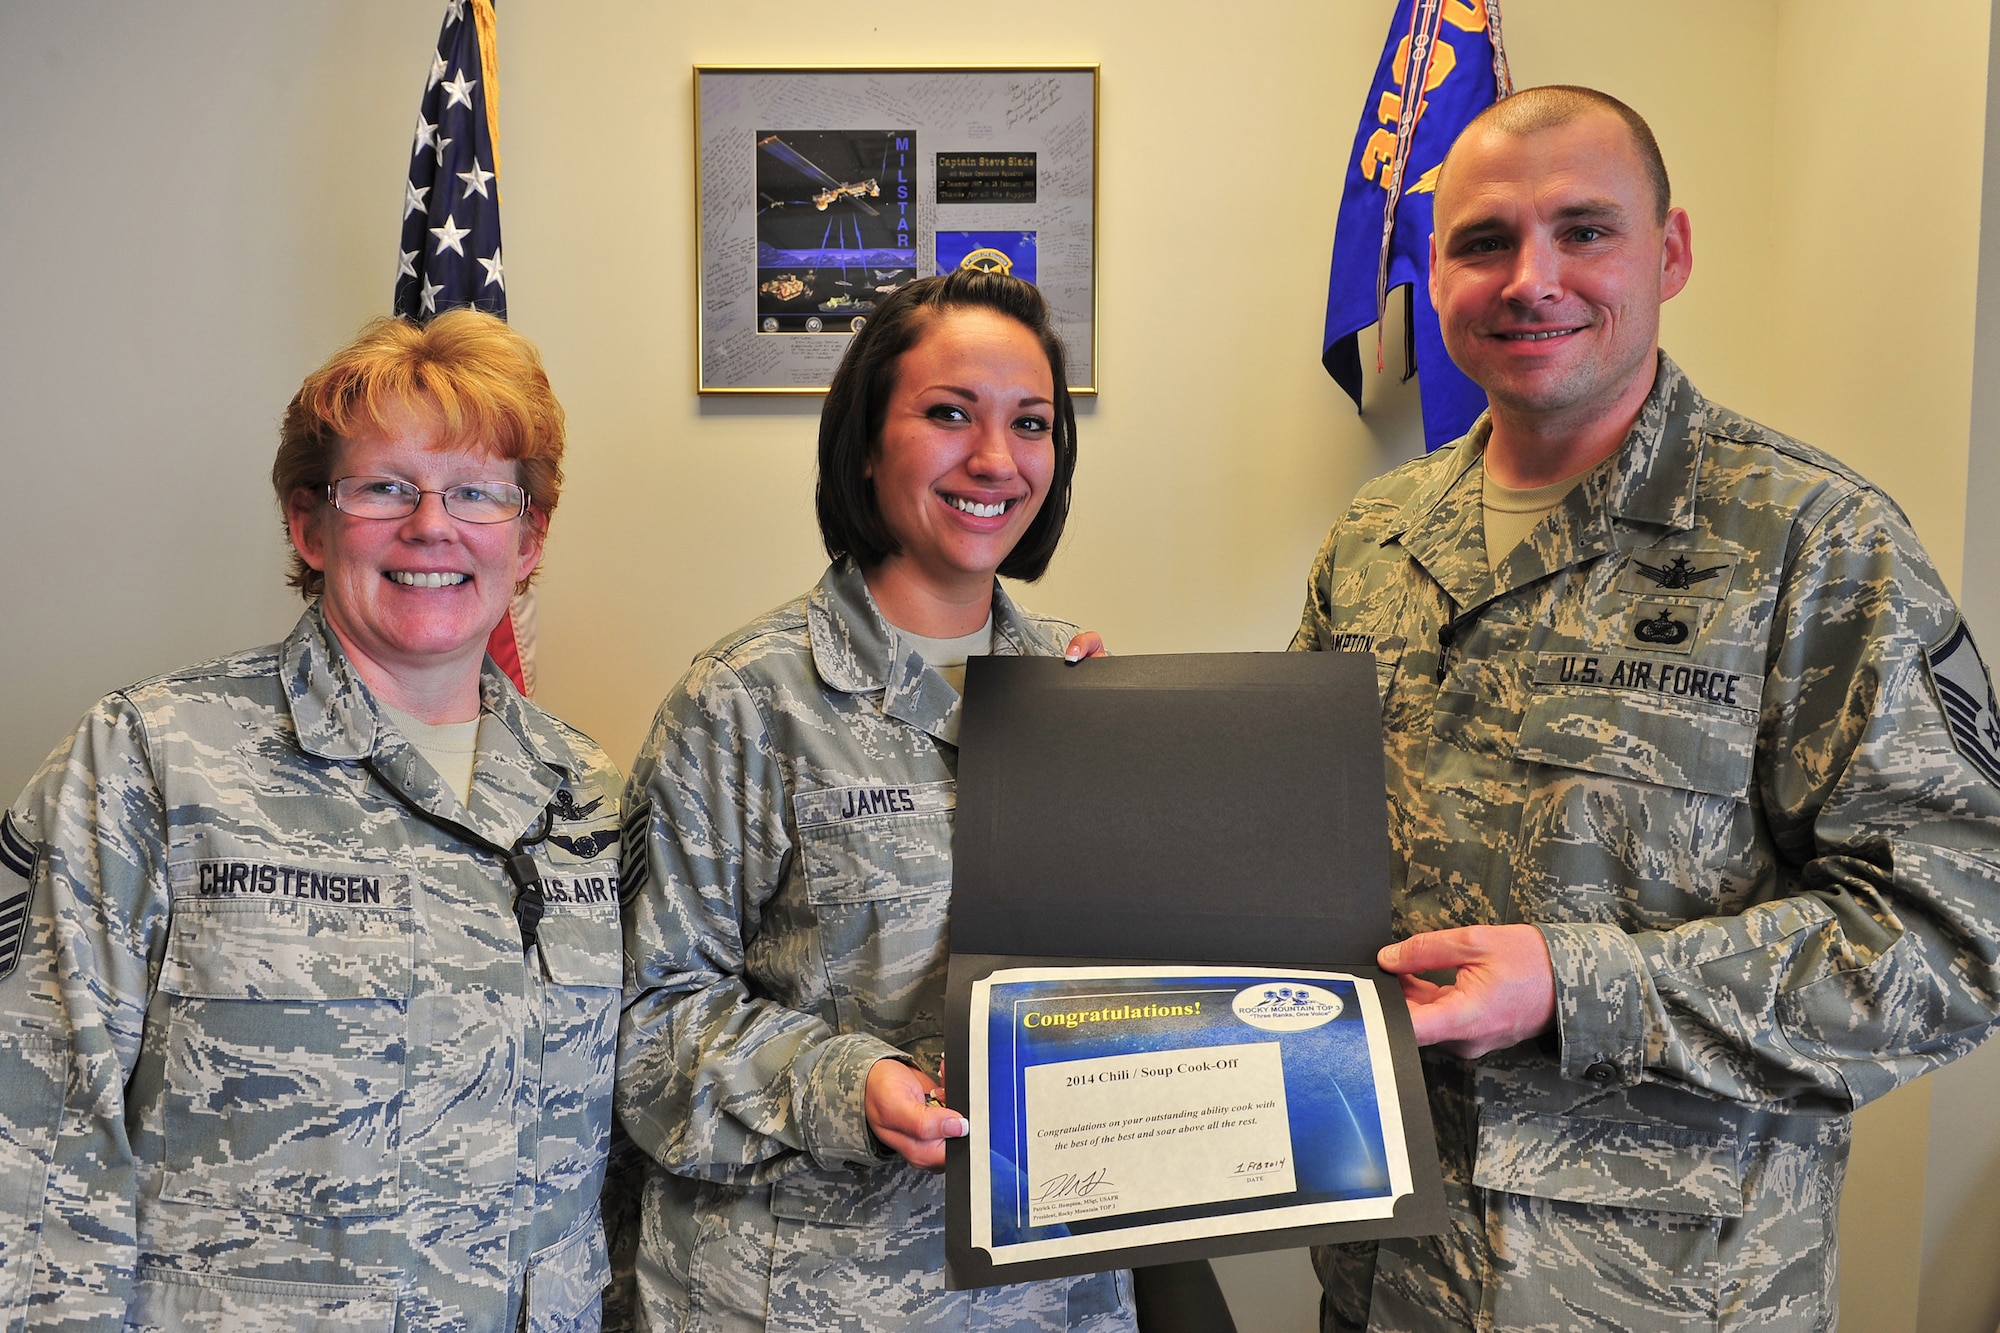 Air Force Reserve Tech. Sgt. Jessica James (center) is awarded first place in the 310th Space Wing Top-3 chili and soup cook-off Feb. 1, 2014, at Schriever Air Force Base, Colo. Senior Master Sgt. Lisa Christensen, along with Master Sgt. Patrick Hampton, awarded James a certificate and a $25 gift card. James won with her "Pueblo Green Chili". The cook-off was held to raise money for the 310th SW annual awards banquet, with $240 raised. The Top-3 is an association of senior non-commissioned officers that promote military professionalism, development and quality of life for all enlisted personnel. (U.S. Air Force photo/Tech. Sgt. Nicholas B. Ontiveros)